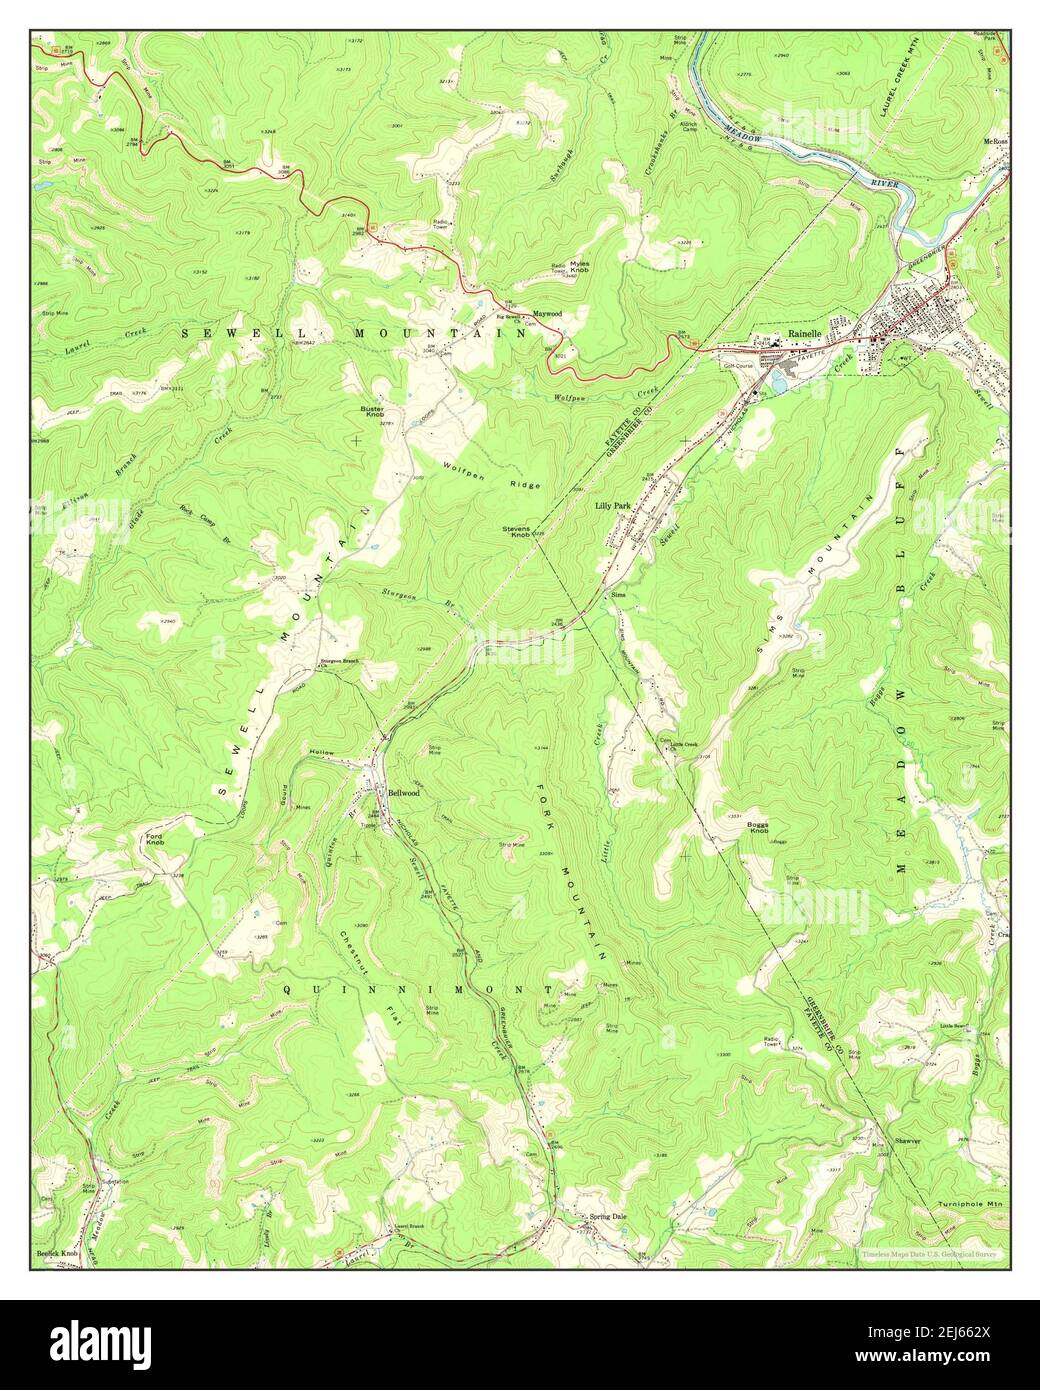 Rainelle, West Virginia, map 1969, 1:24000, United States of America by Timeless Maps, data U.S. Geological Survey Stock Photo